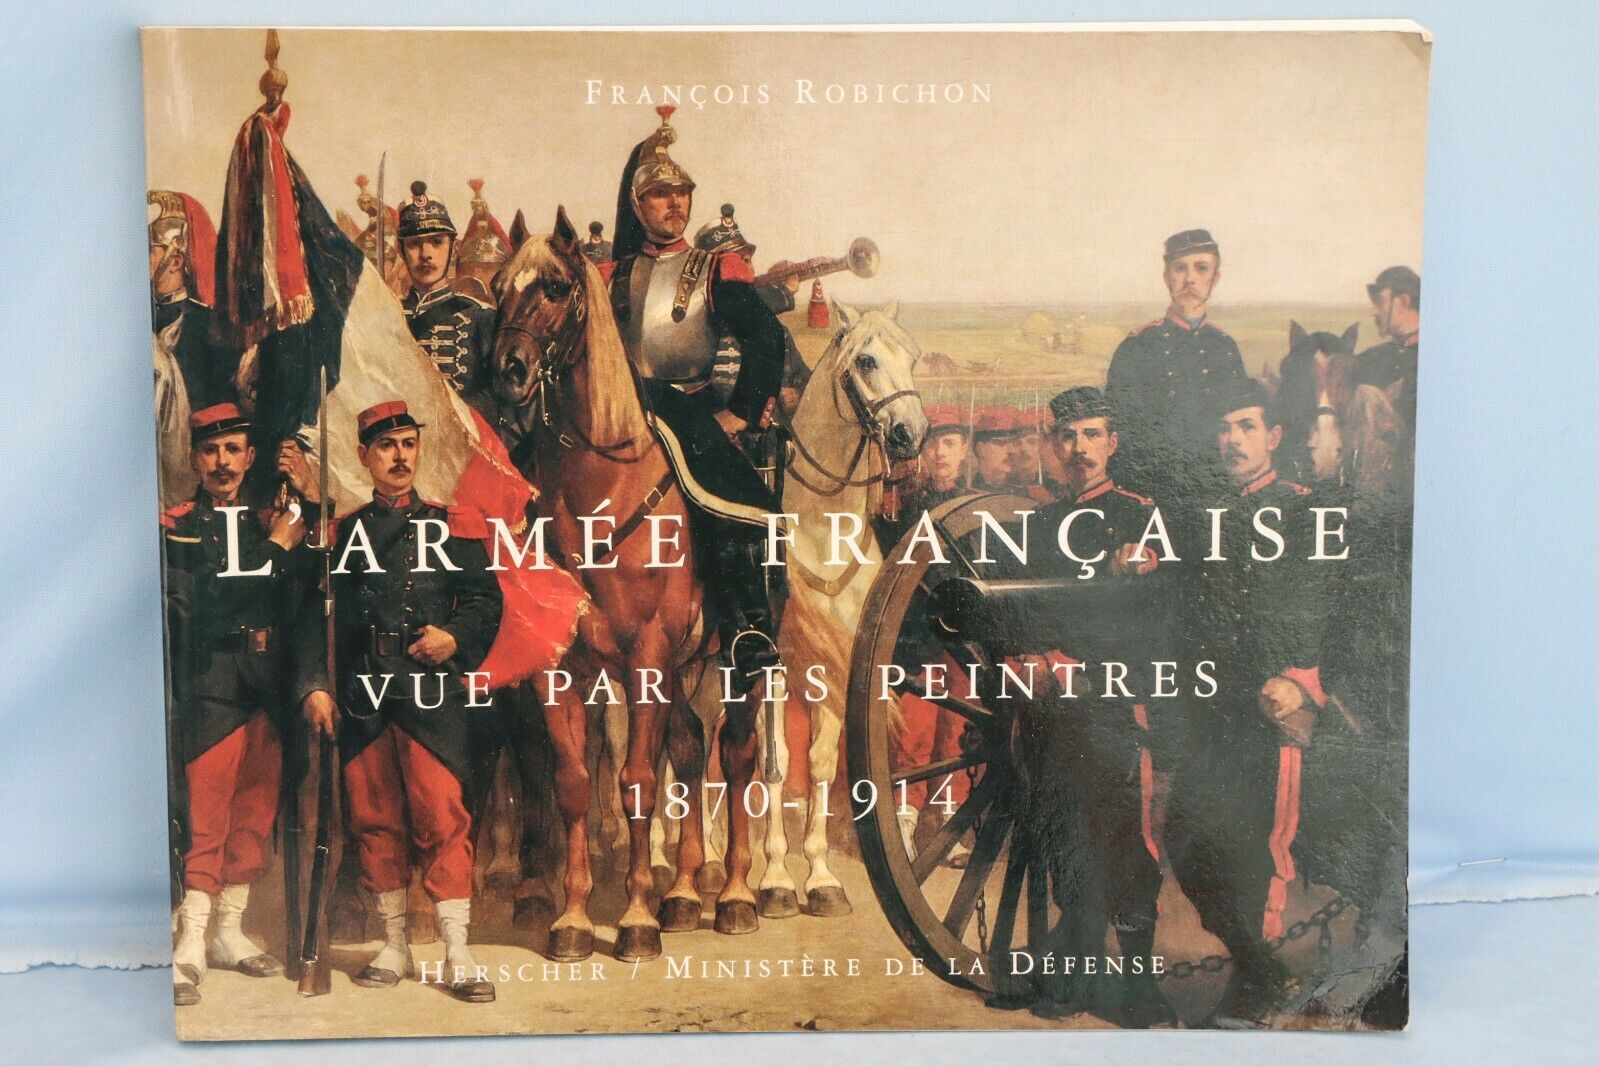 L'Armee Francaise Book French Army by Francois Robichon